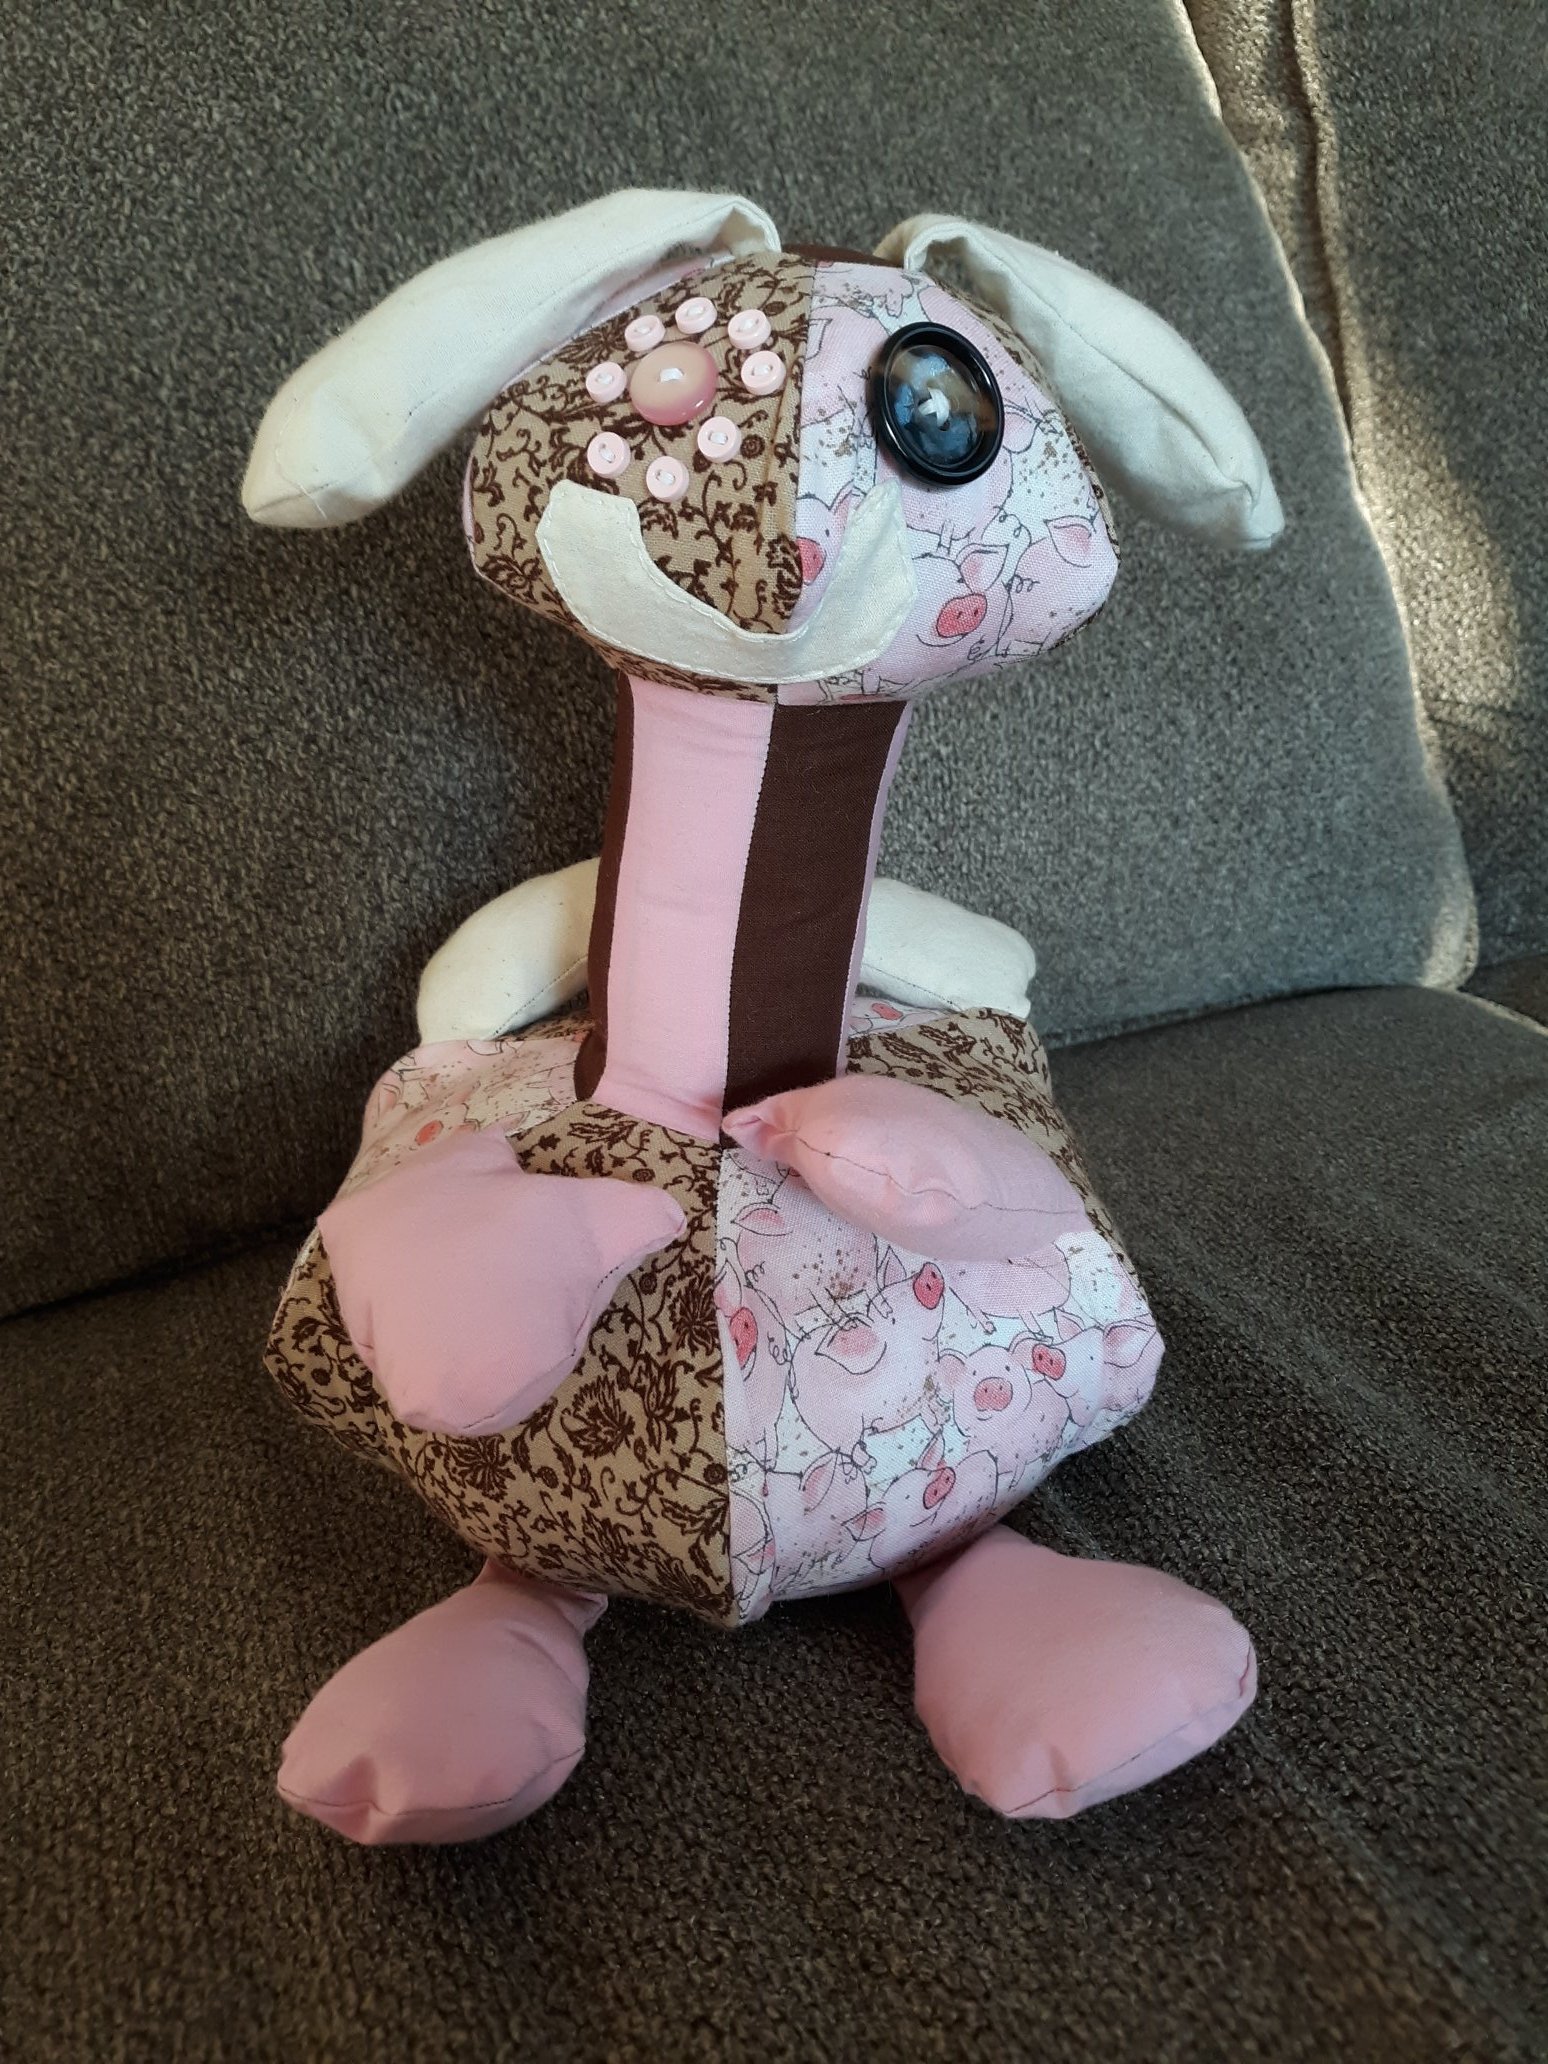 A hand made doll sitting on a couch. It has a round head with alternating floral and pig patterns with a white smile and pink and brown buttons for eyes. There are white ears coming out of the top of the head. The neck is long and thin made of alternating brown and pink fabrics. The body is also round with the same alternating pig and floral patterns. There are pink arms and legs poking out of the body. There are also white wings in the back.